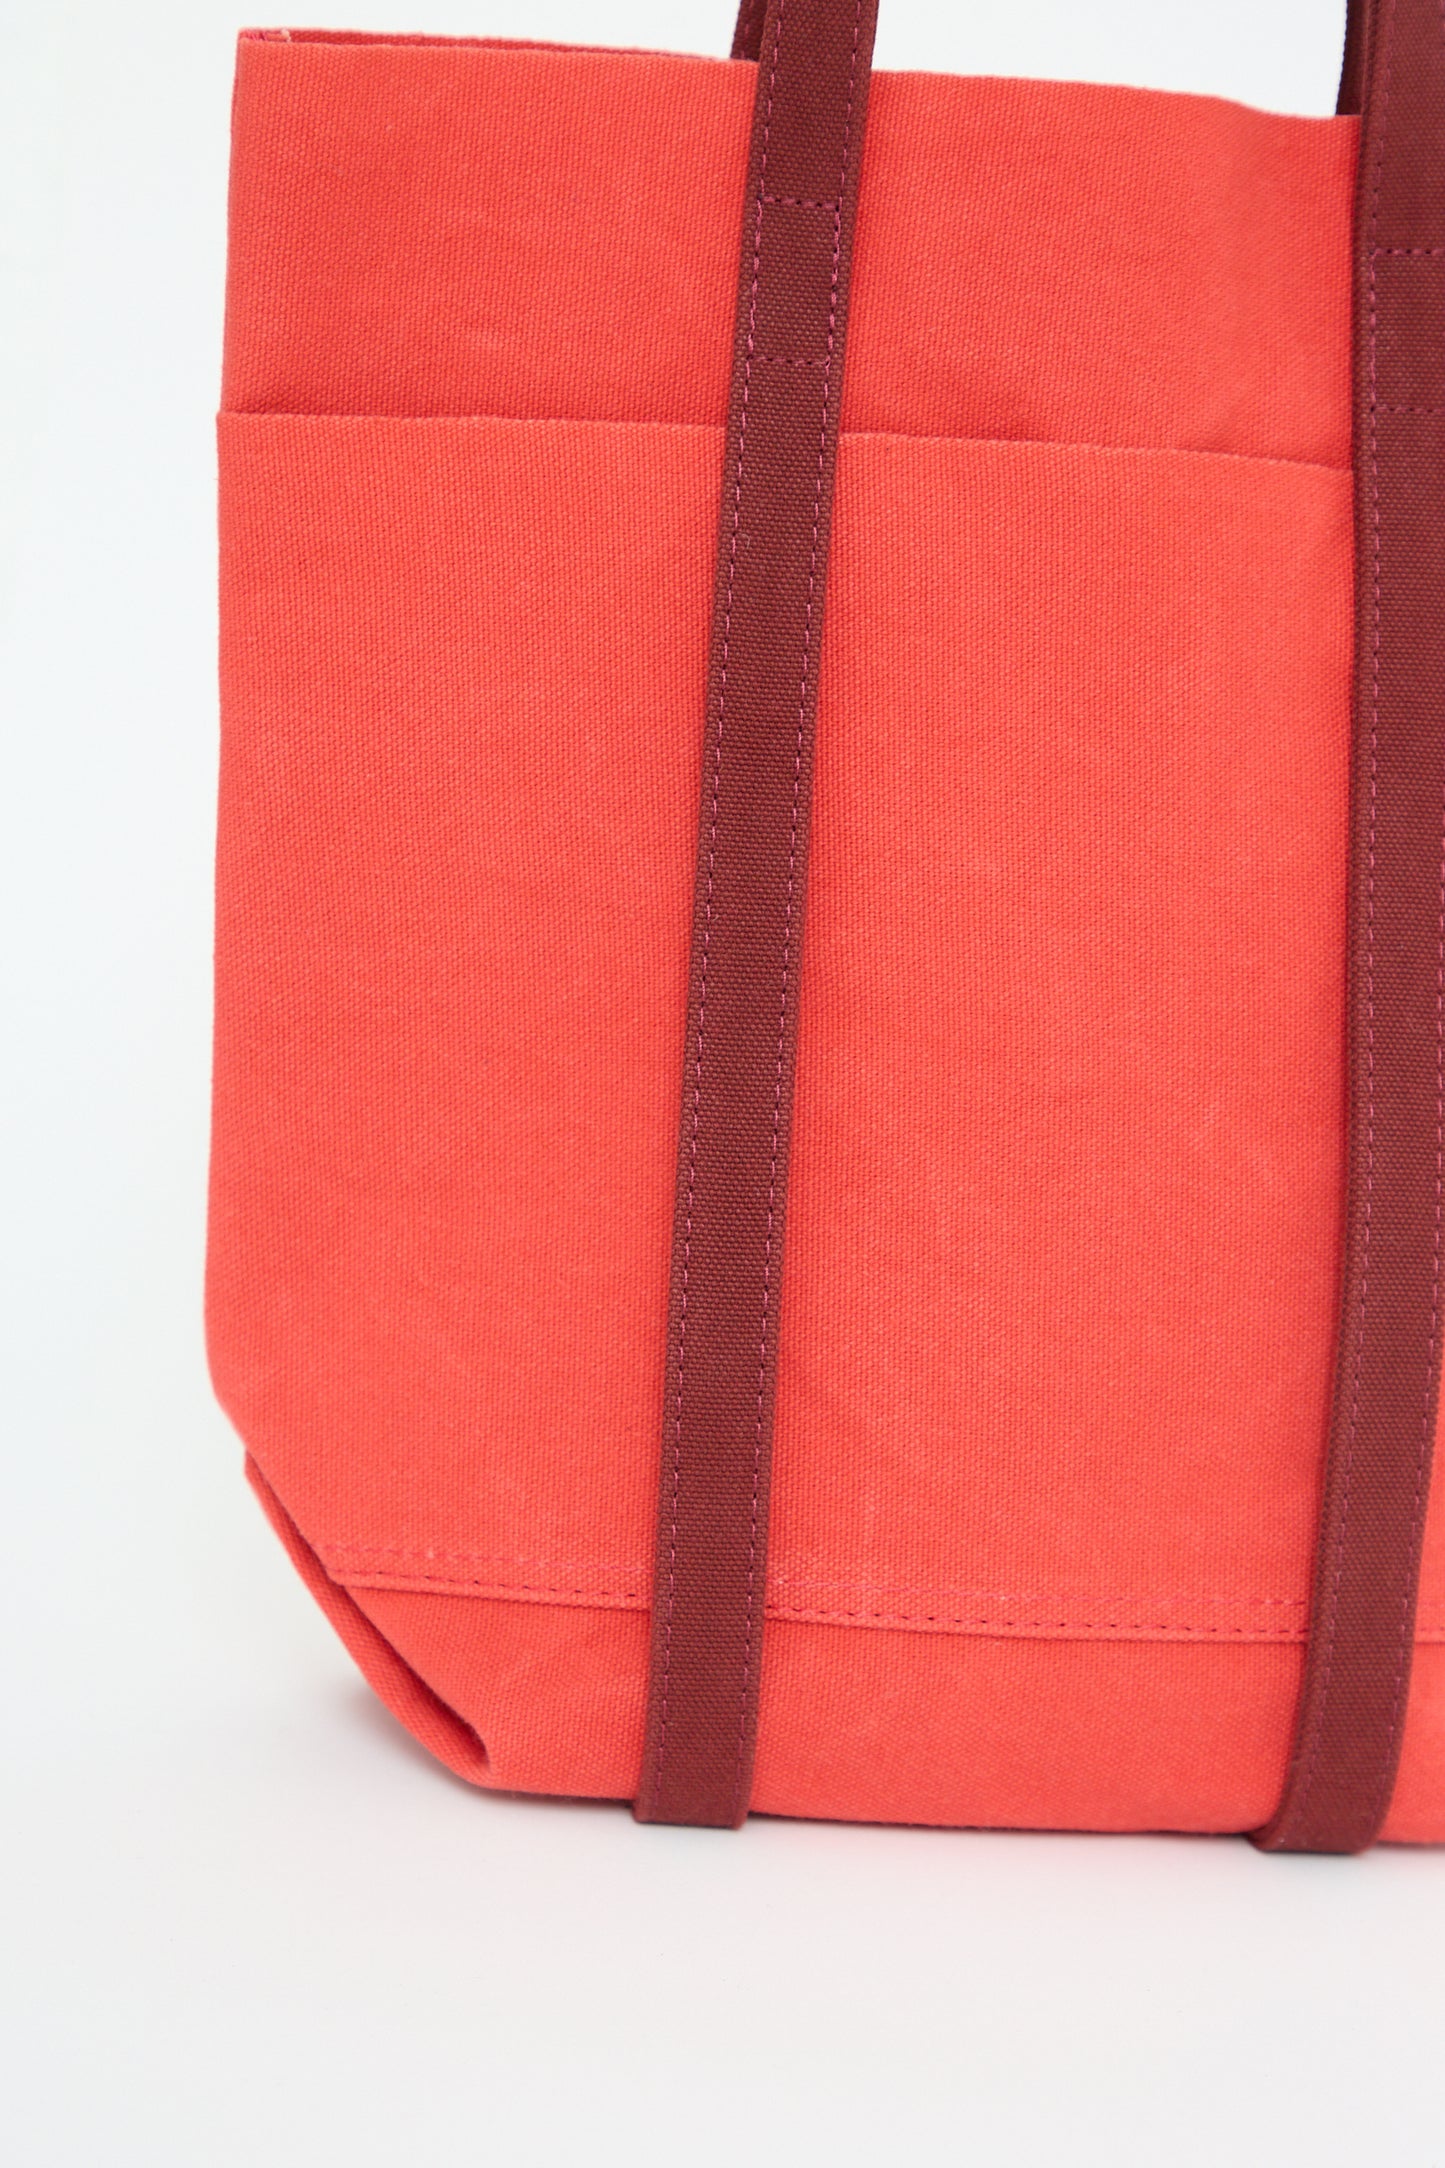 A close-up of a red Amiacalva Light Ounce Canvas Tote in Scarlet and Burgundy with brown handles against a white background.